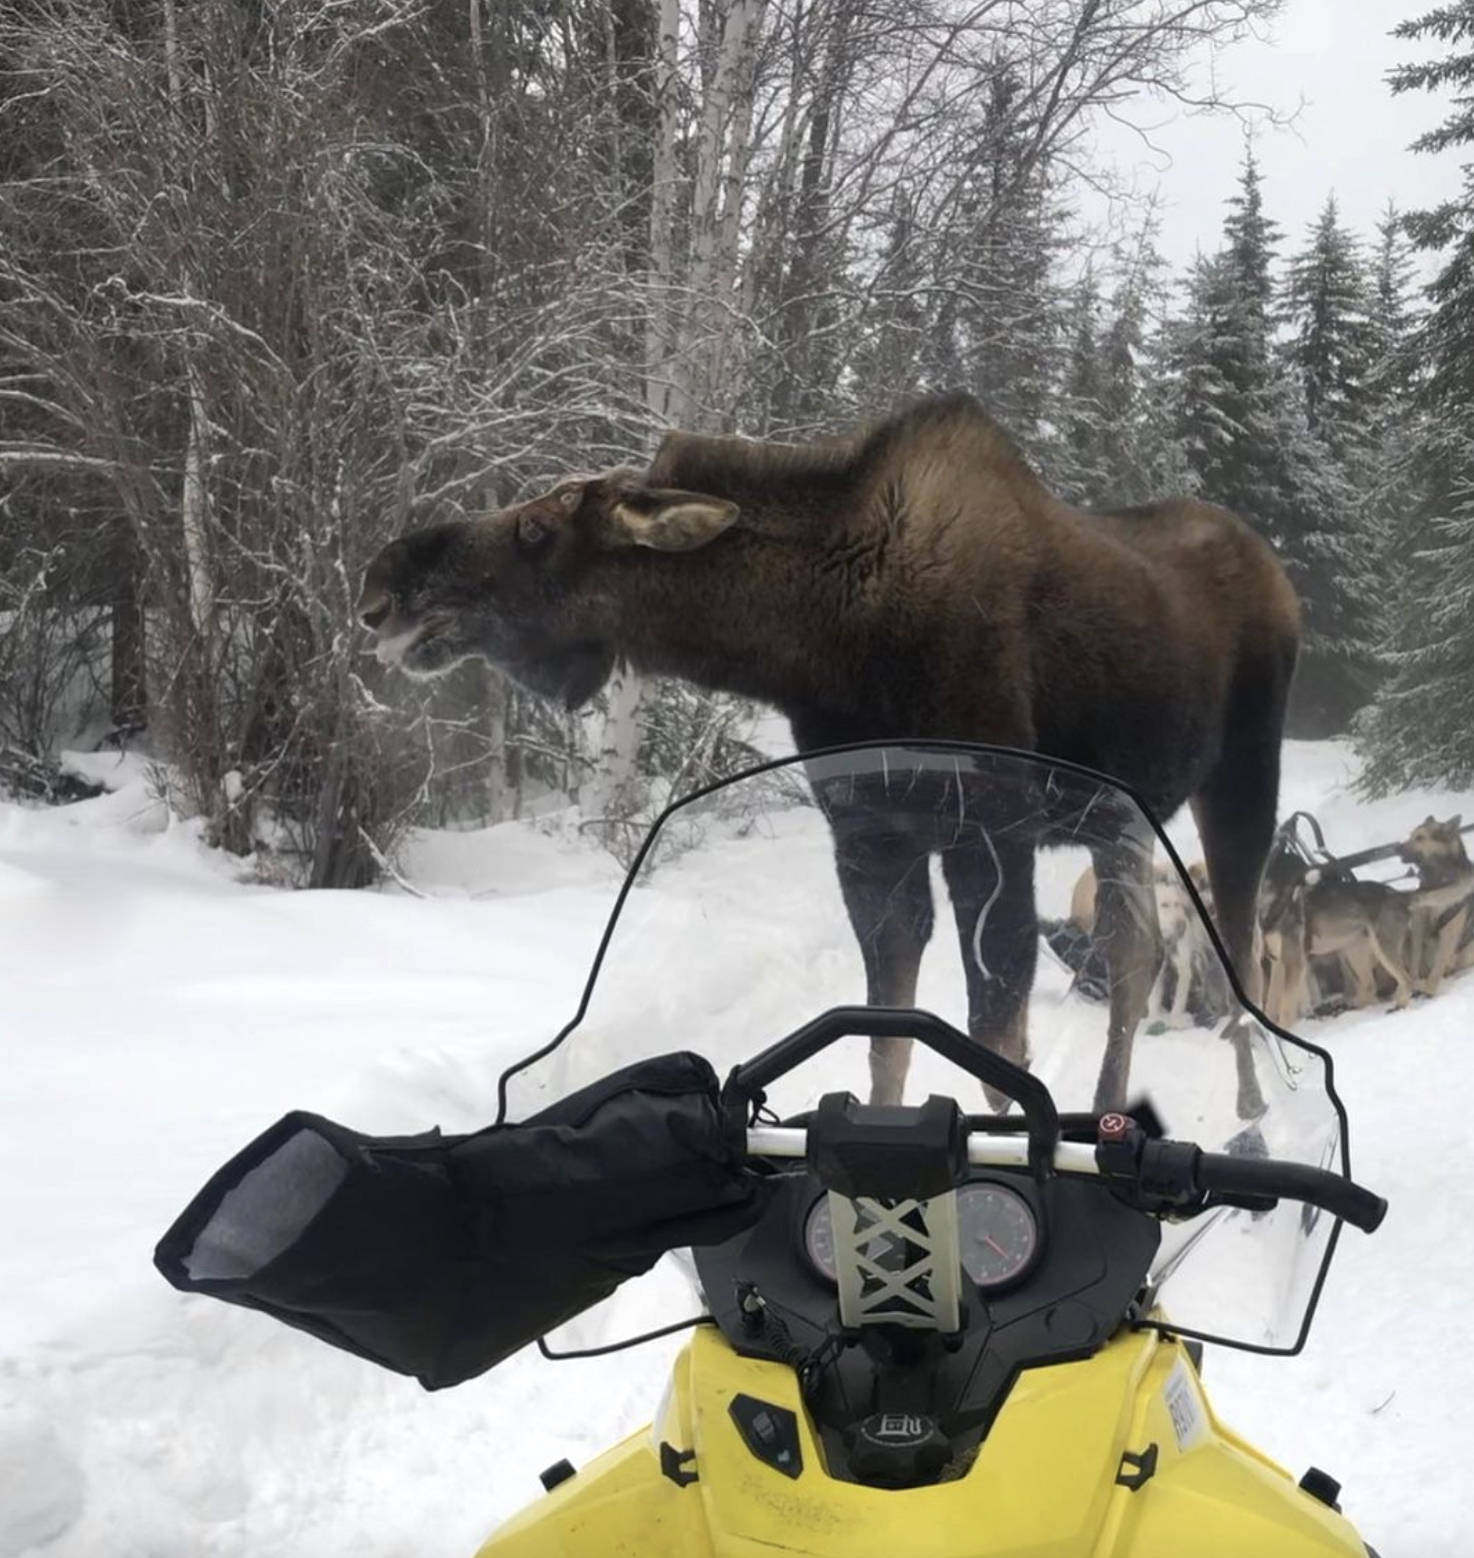 Sled dog team attacked by moose.